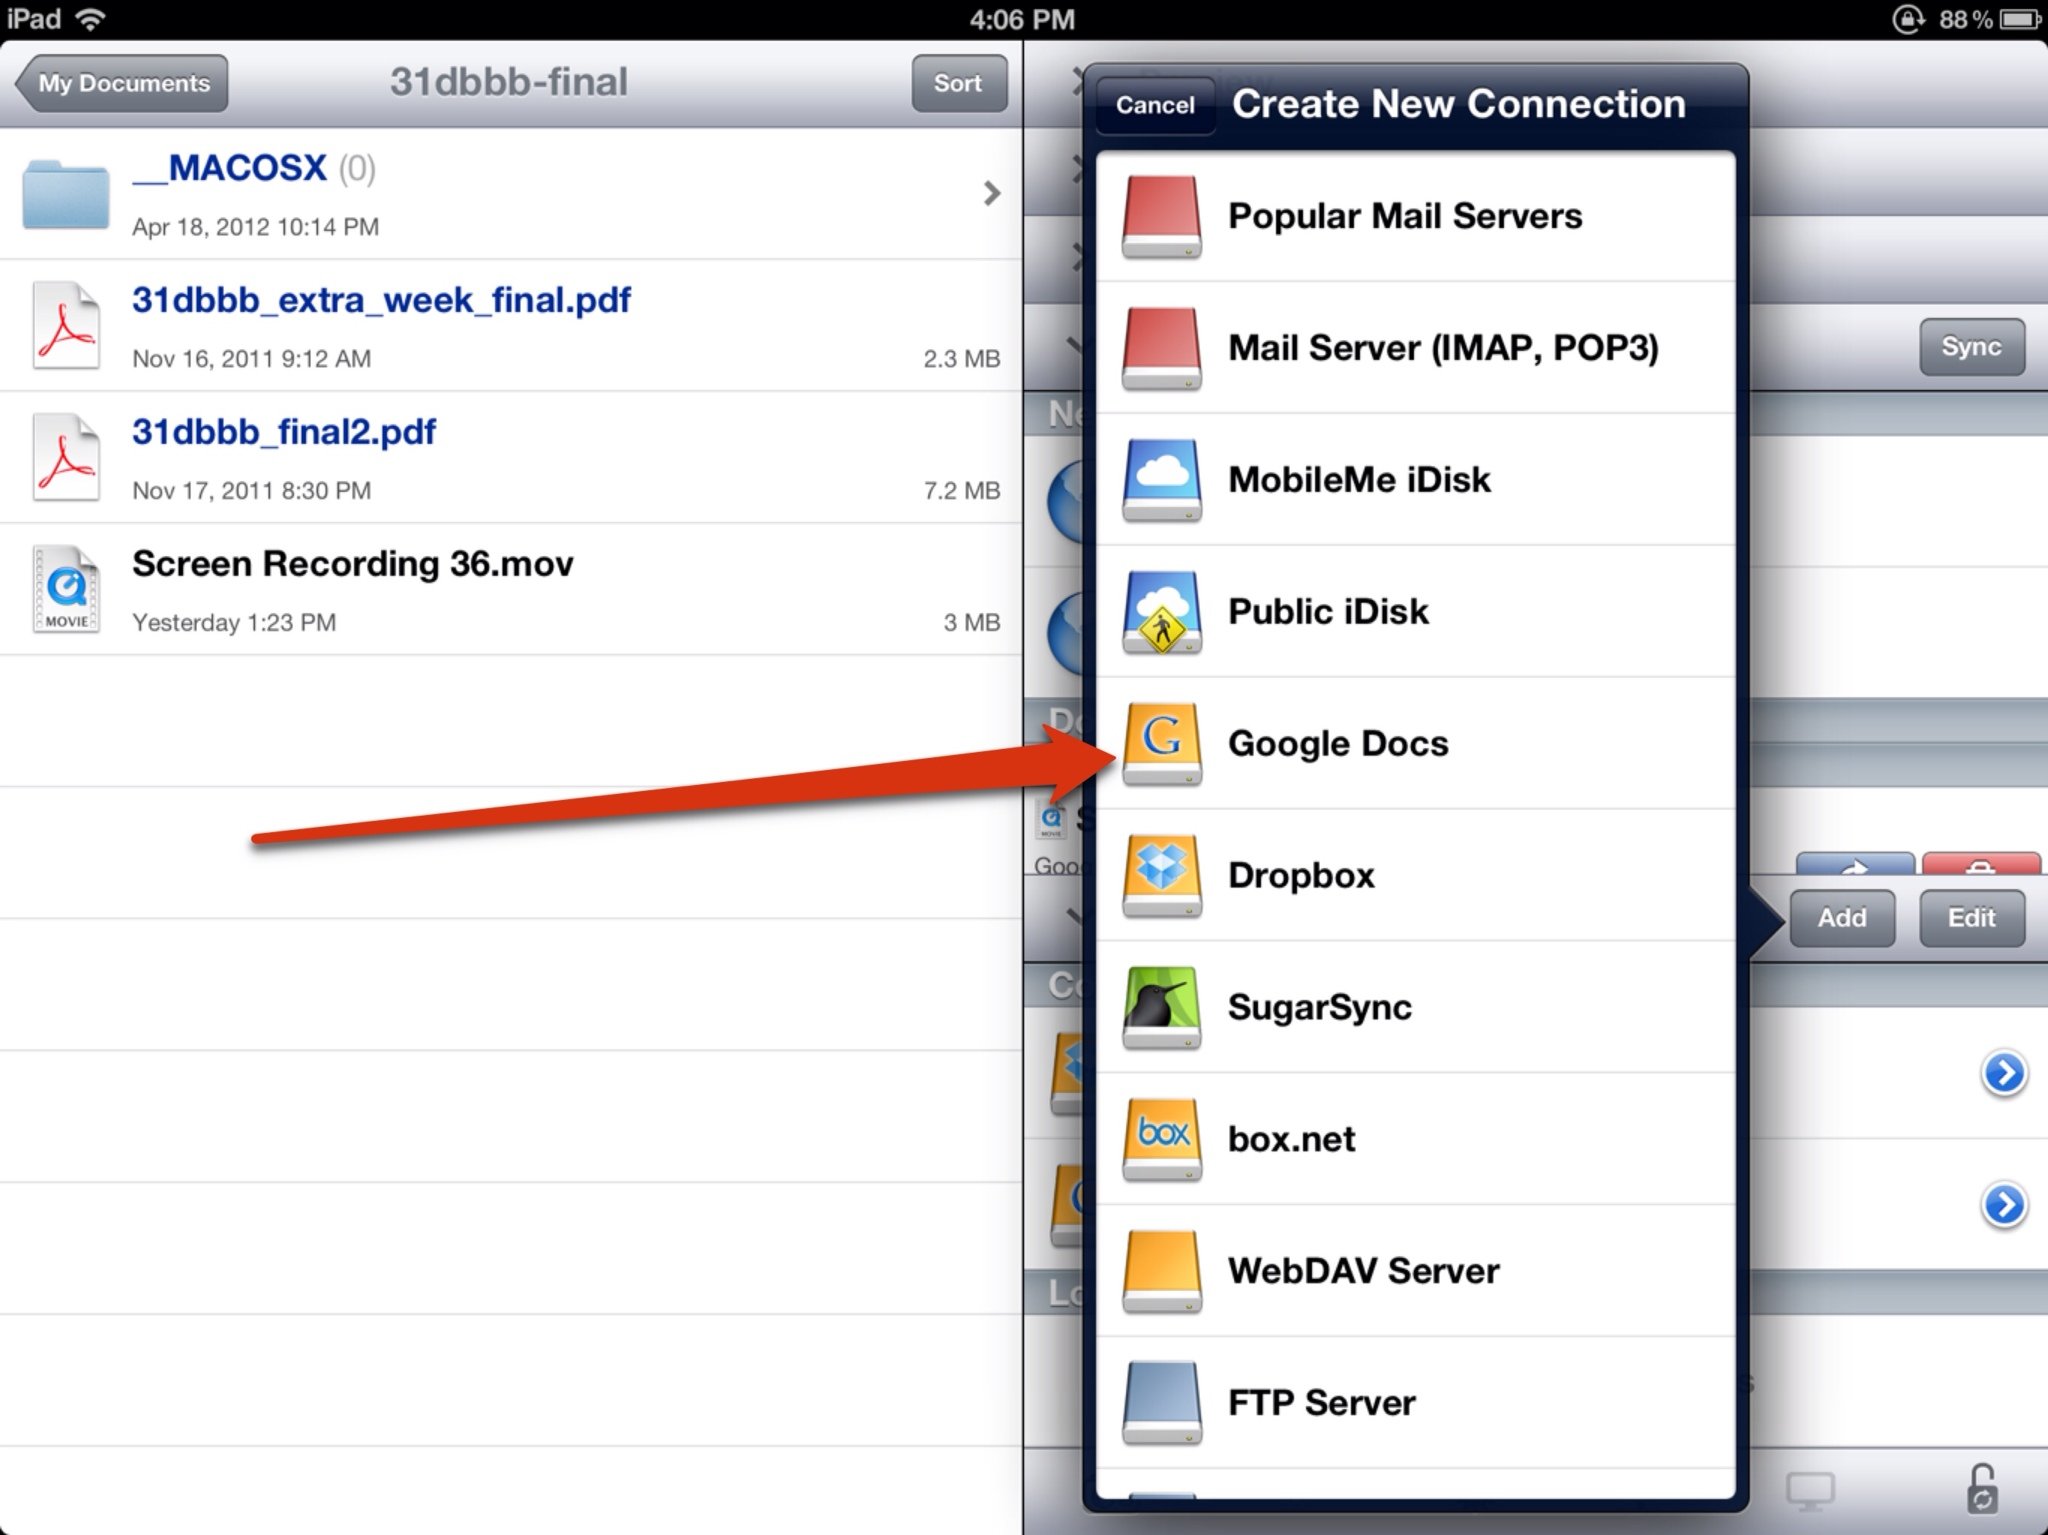 google drive for ipad download